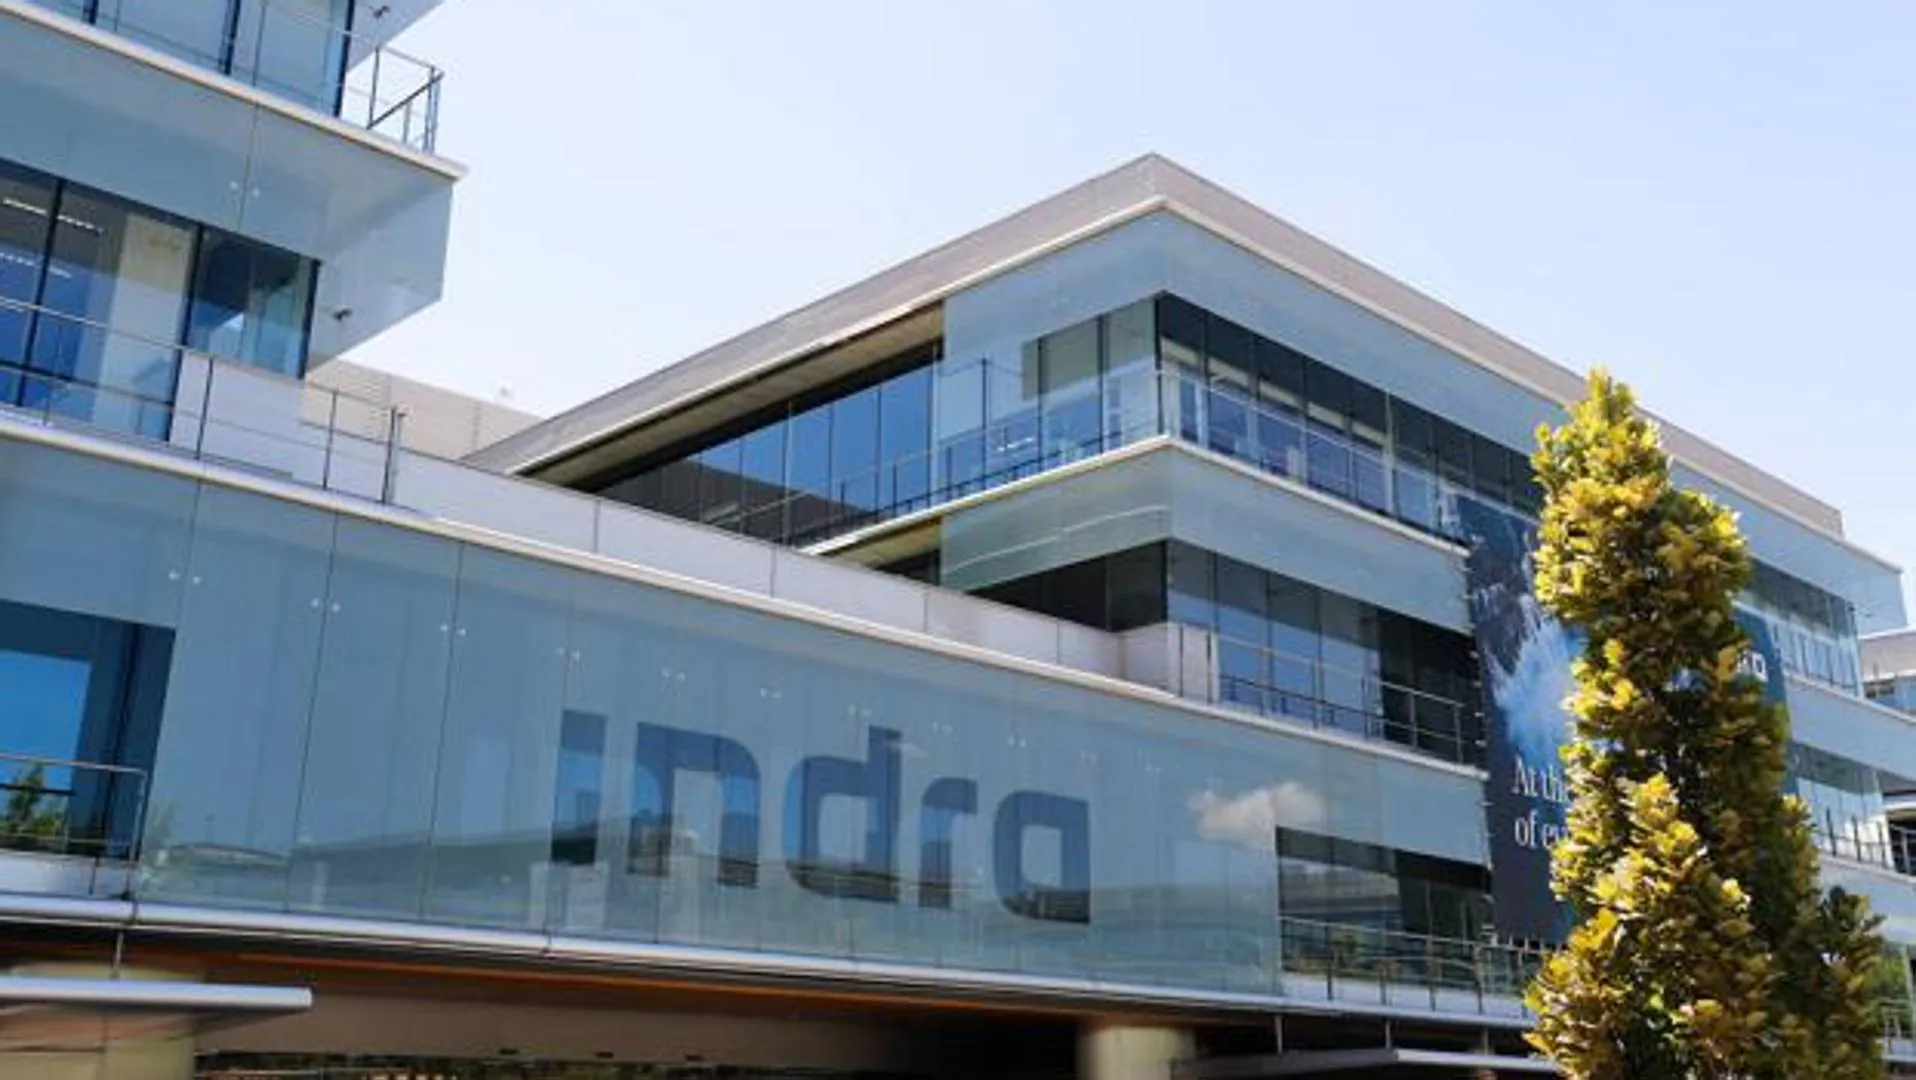 Indra will increase the number of directors to 16 with two women as independent